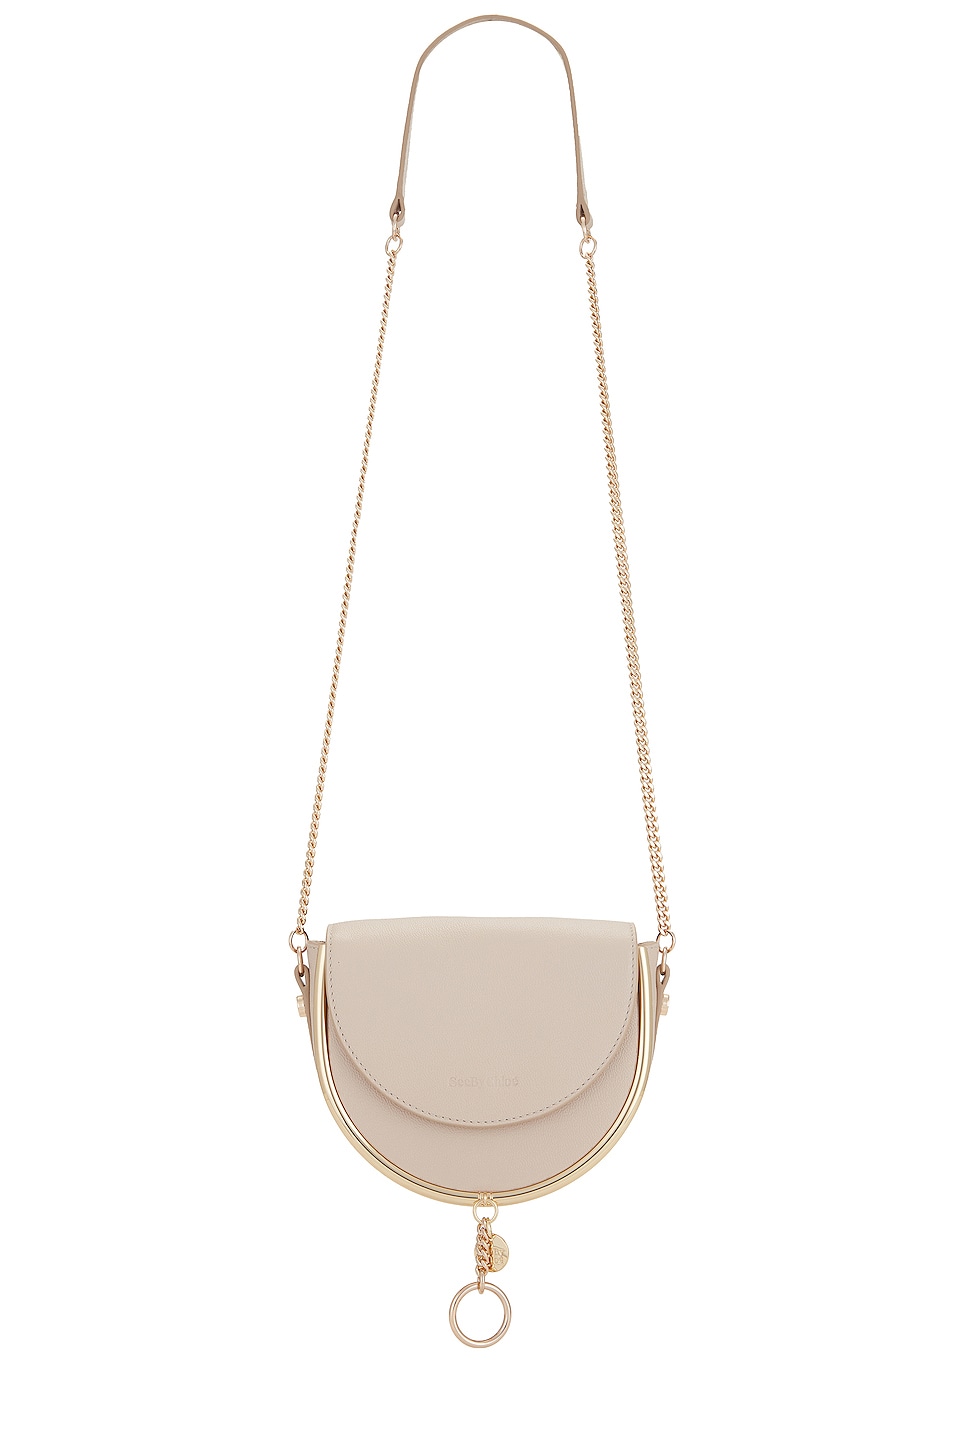 See By Chloe Mara Evening Bag in Cement Beige | REVOLVE